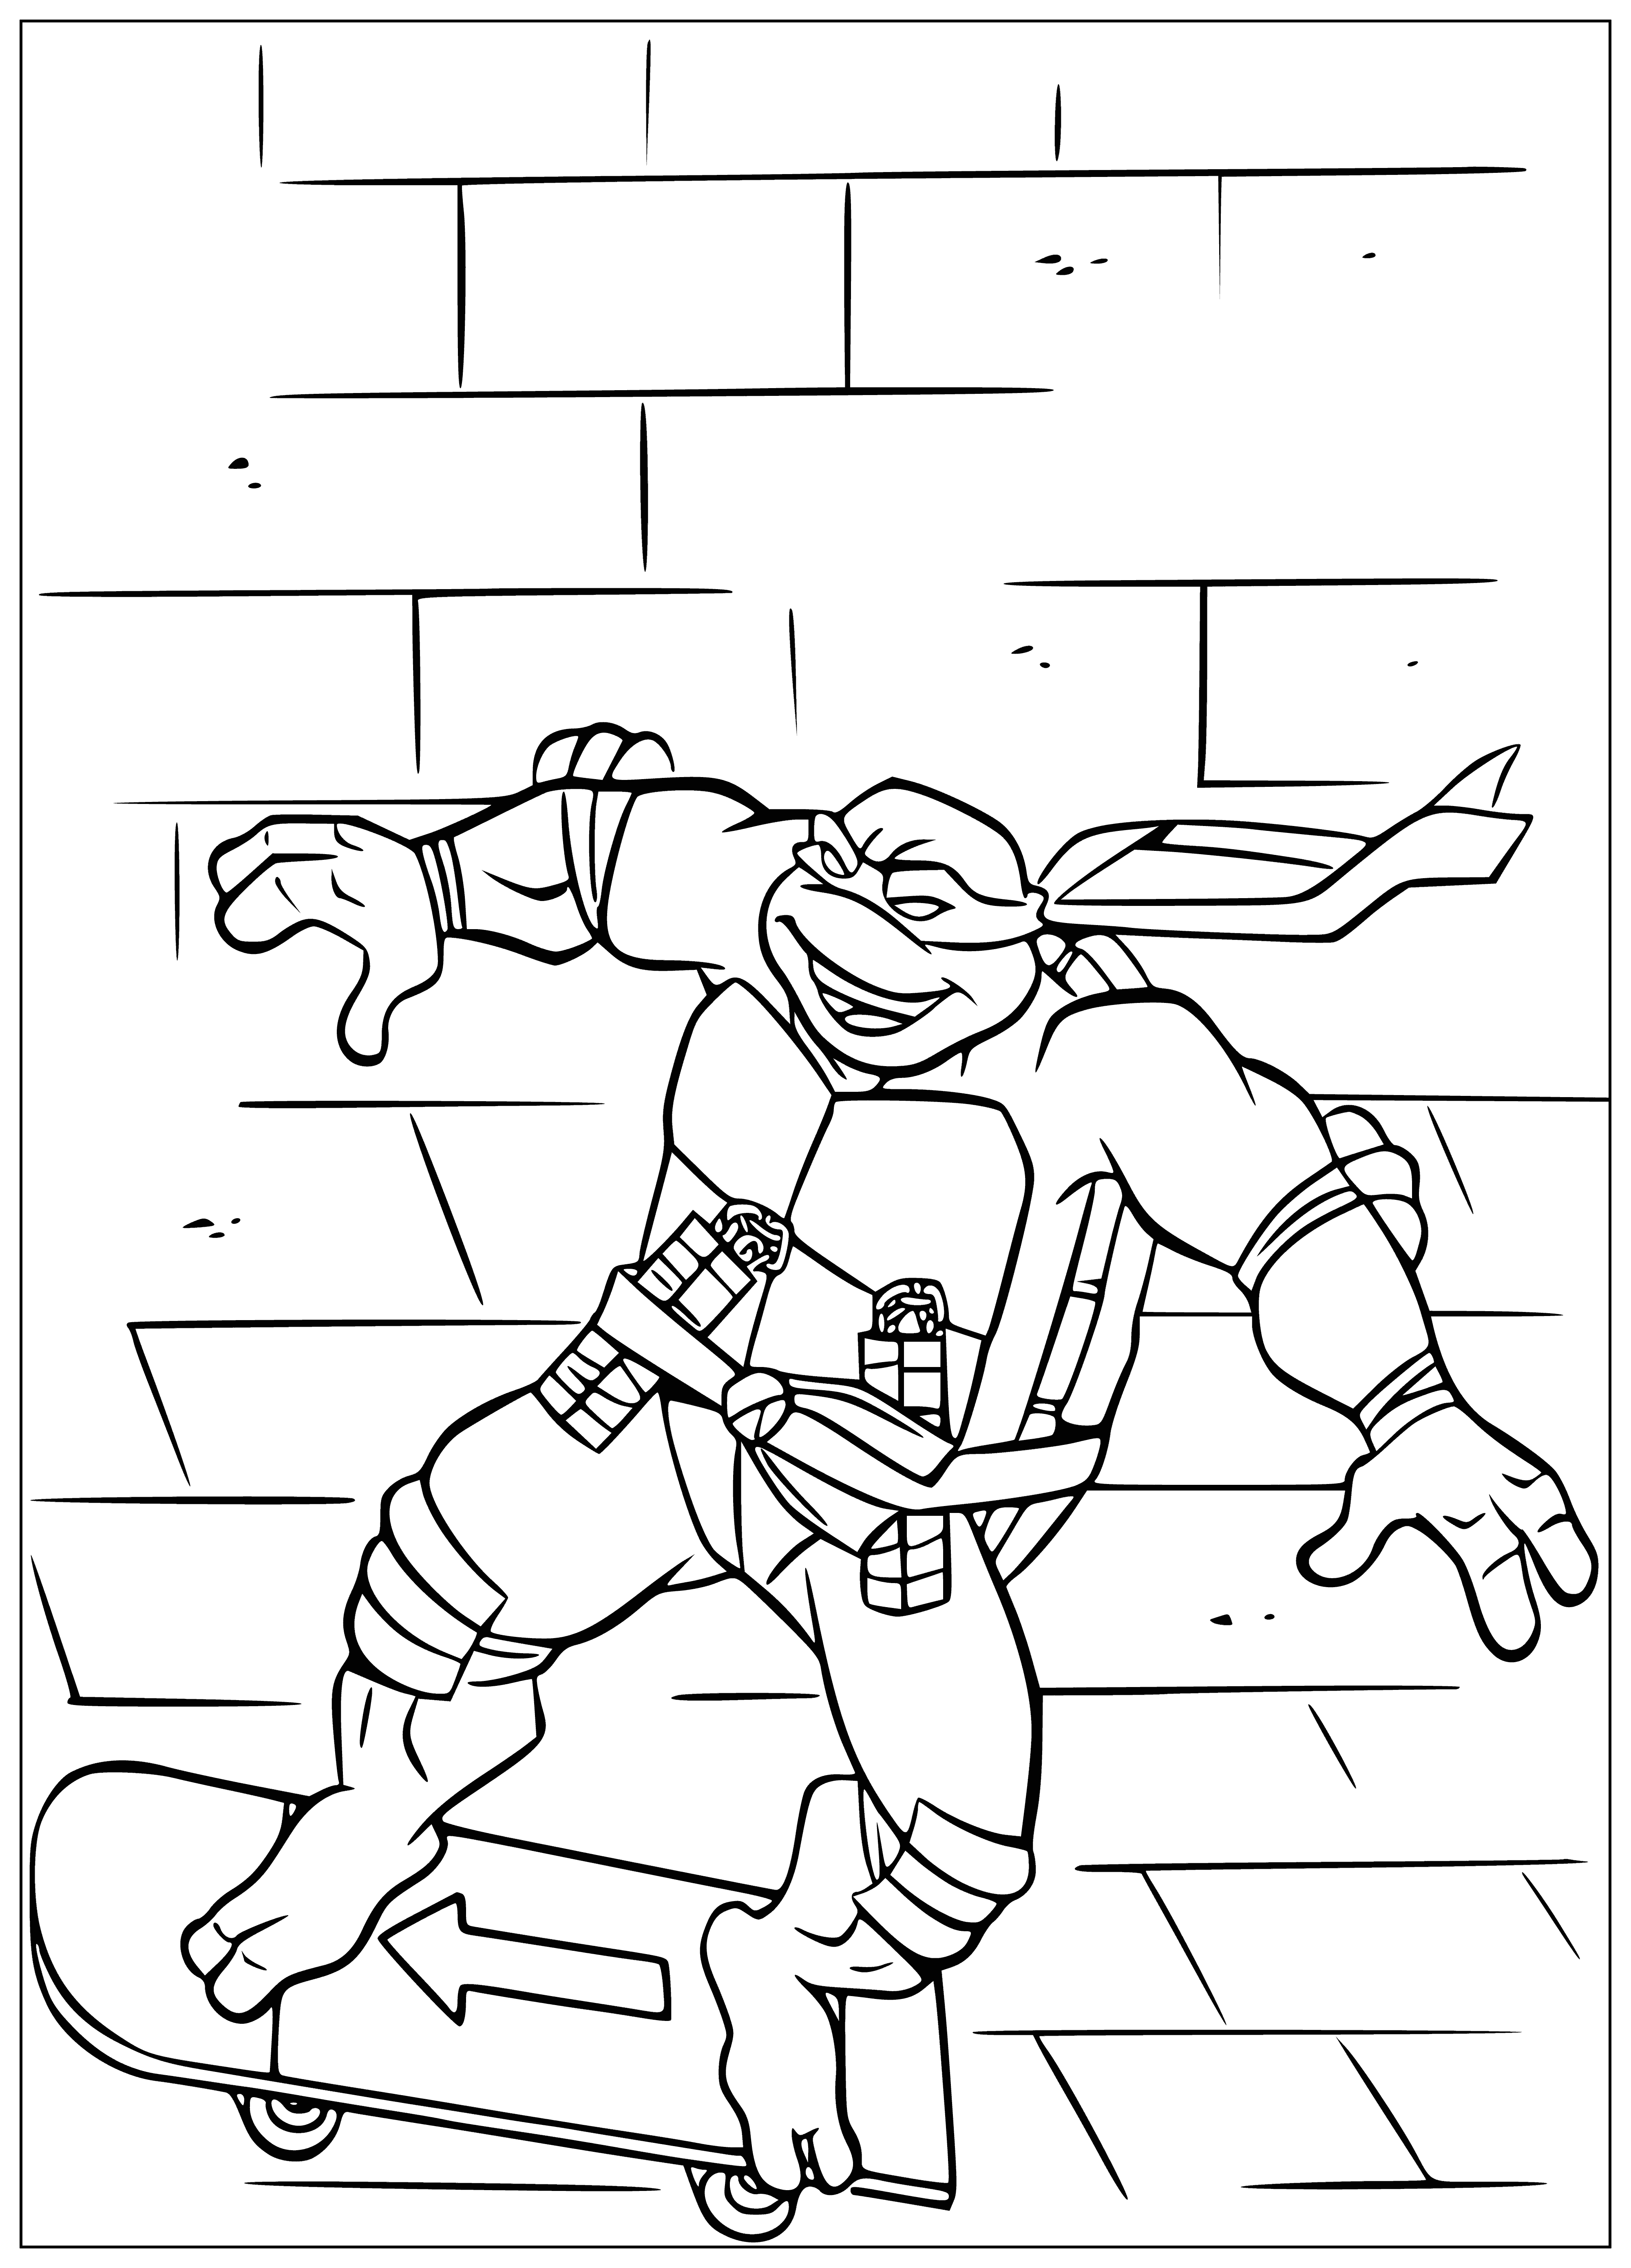 Raphael on a skateboard coloring page